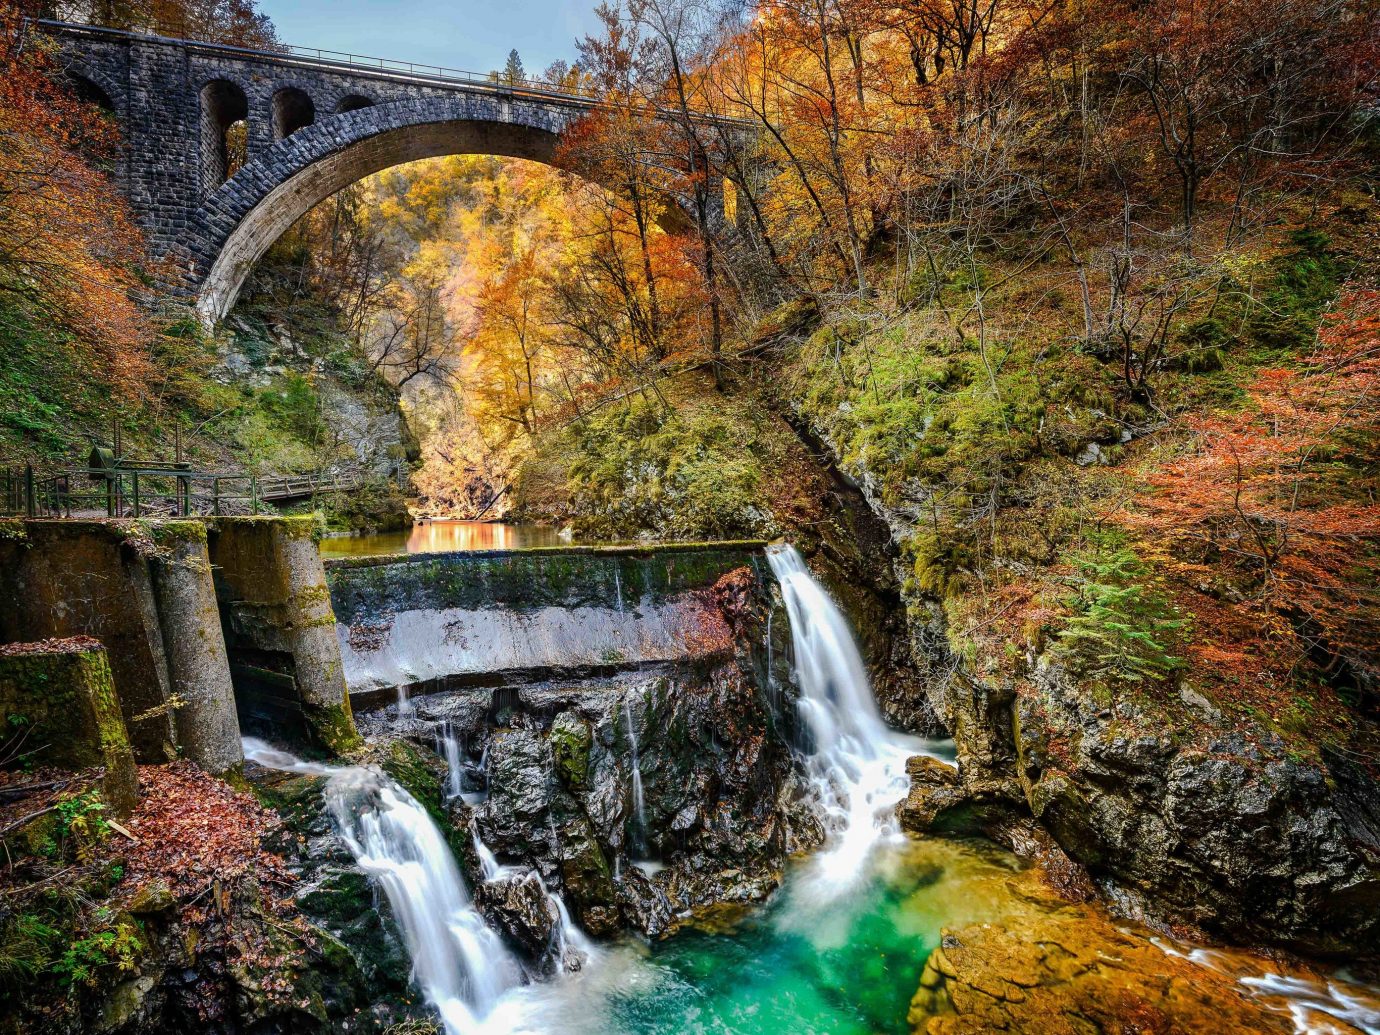 Croatia Eastern Europe europe Montenegro Slovenia Trip Ideas water Nature Waterfall leaf body of water vegetation watercourse nature reserve autumn stream tree water feature River reflection landscape creek plant water resources chute state park arroyo rock